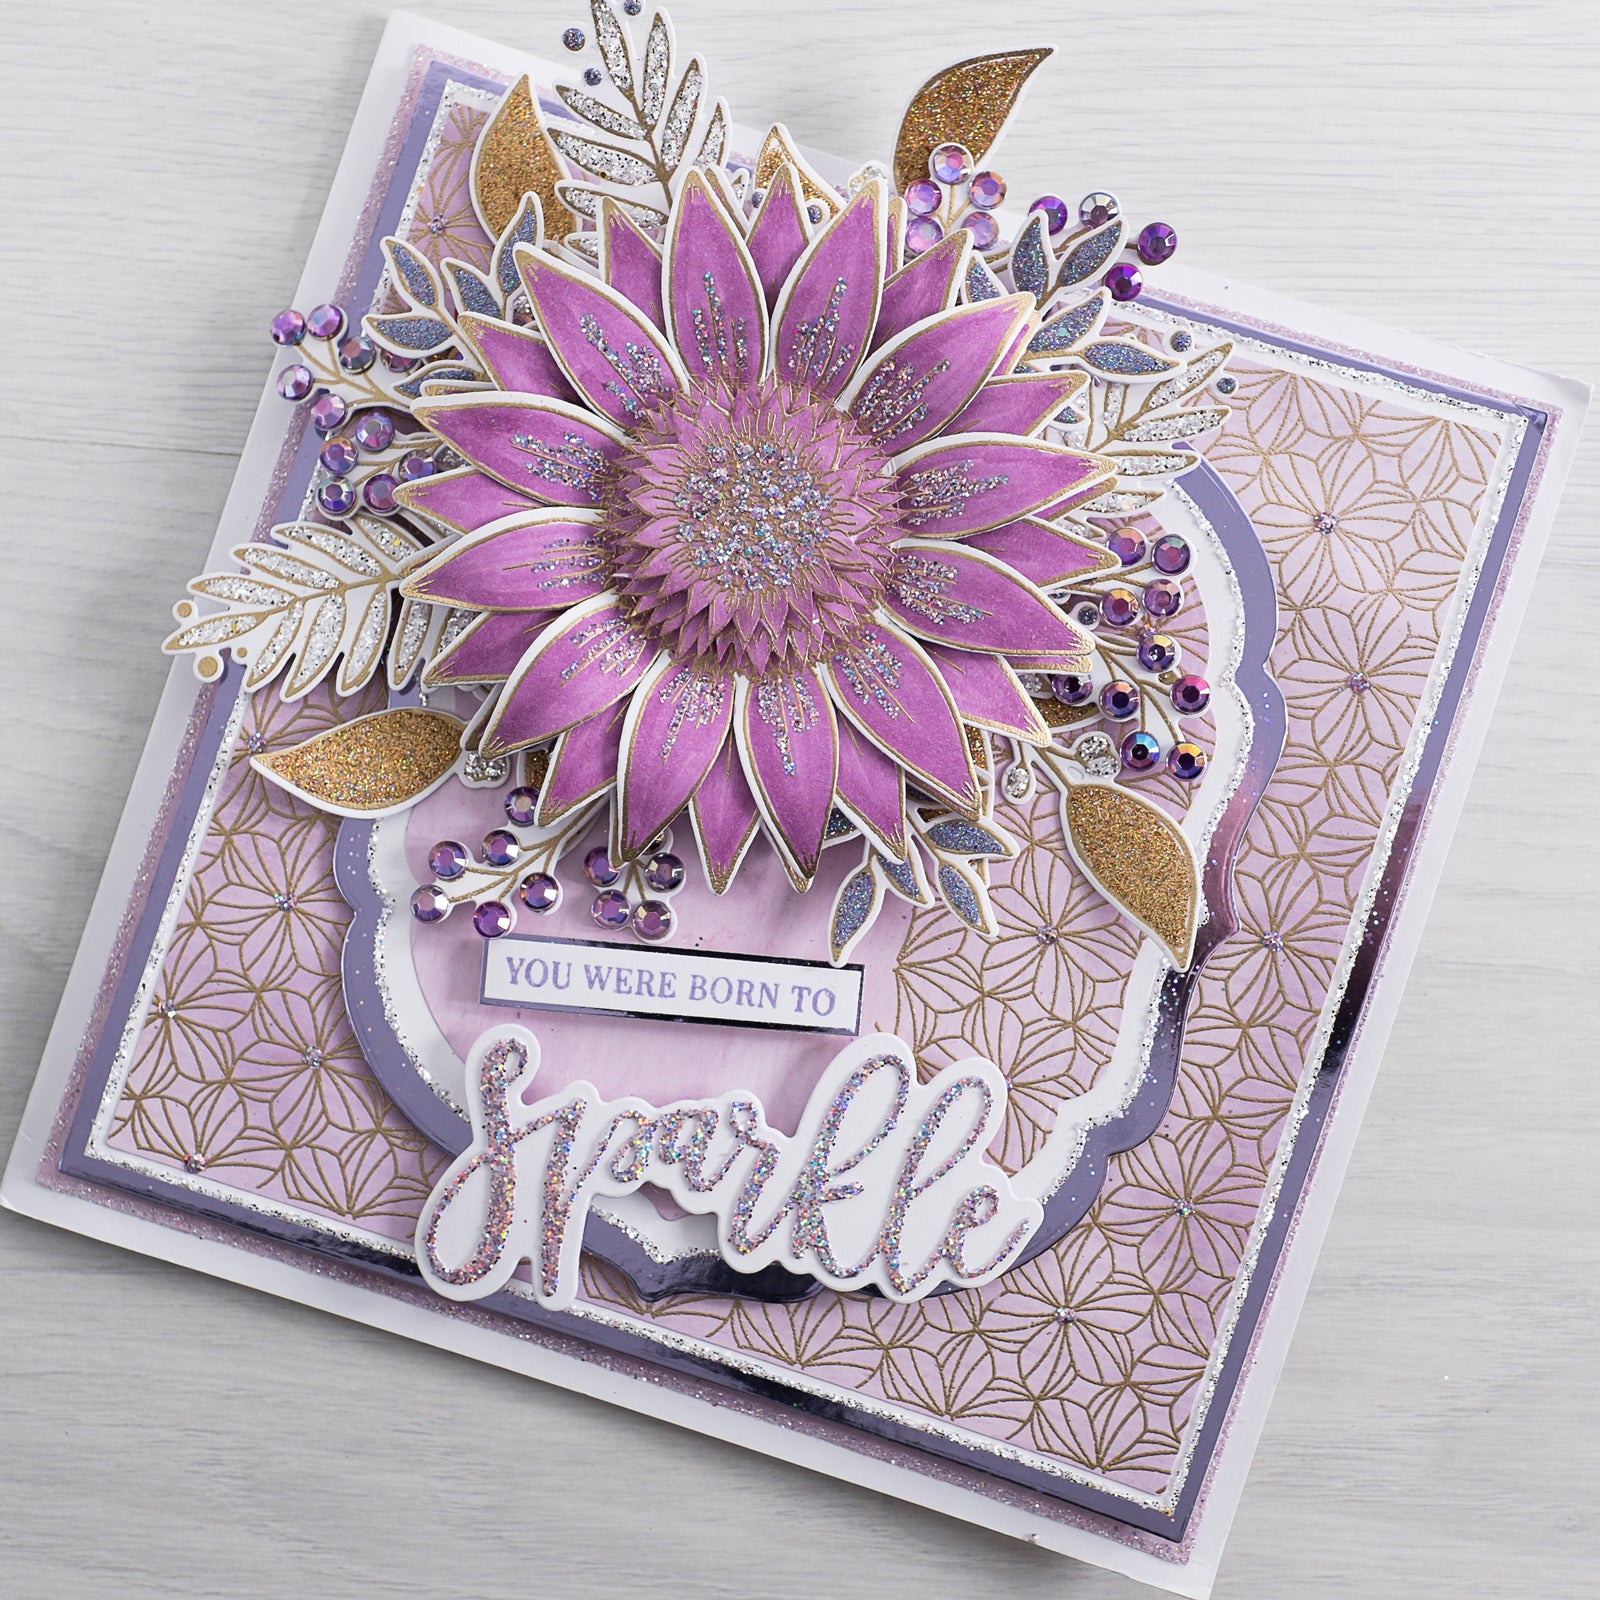 Learn how to create this bright pink and purple 3D flower card filled with glitter and sparkle using our free step-by-step card-making tutorial from Chloes Creative Cards.